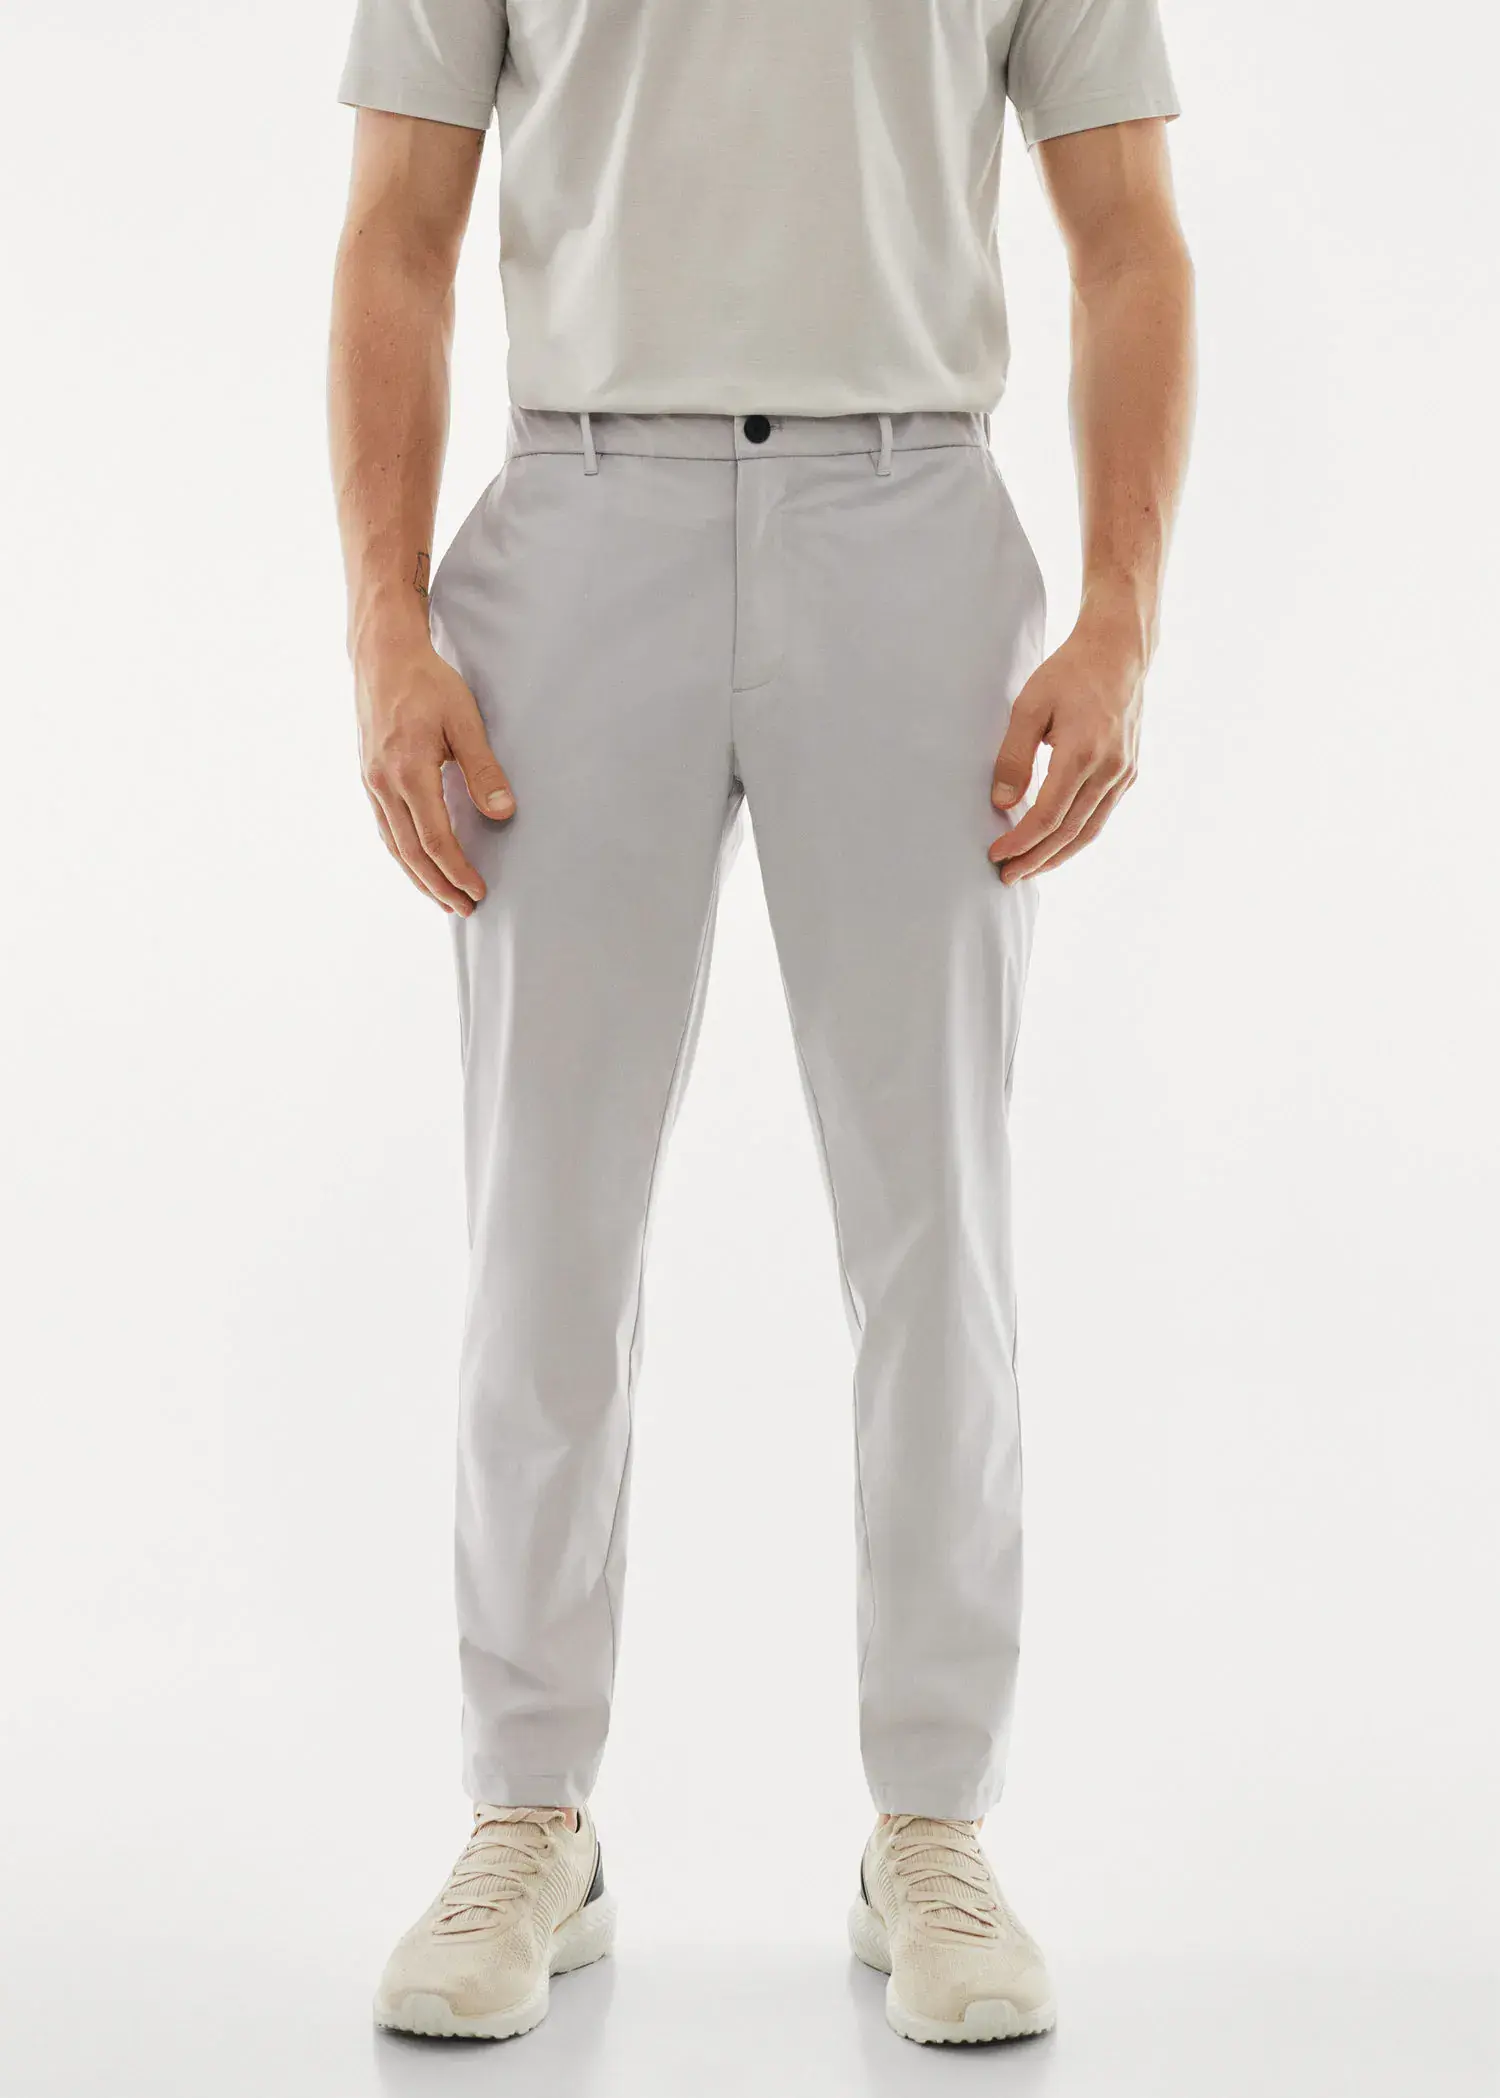 Mango Water-repellent technical pants. a man wearing a white shirt and gray pants. 